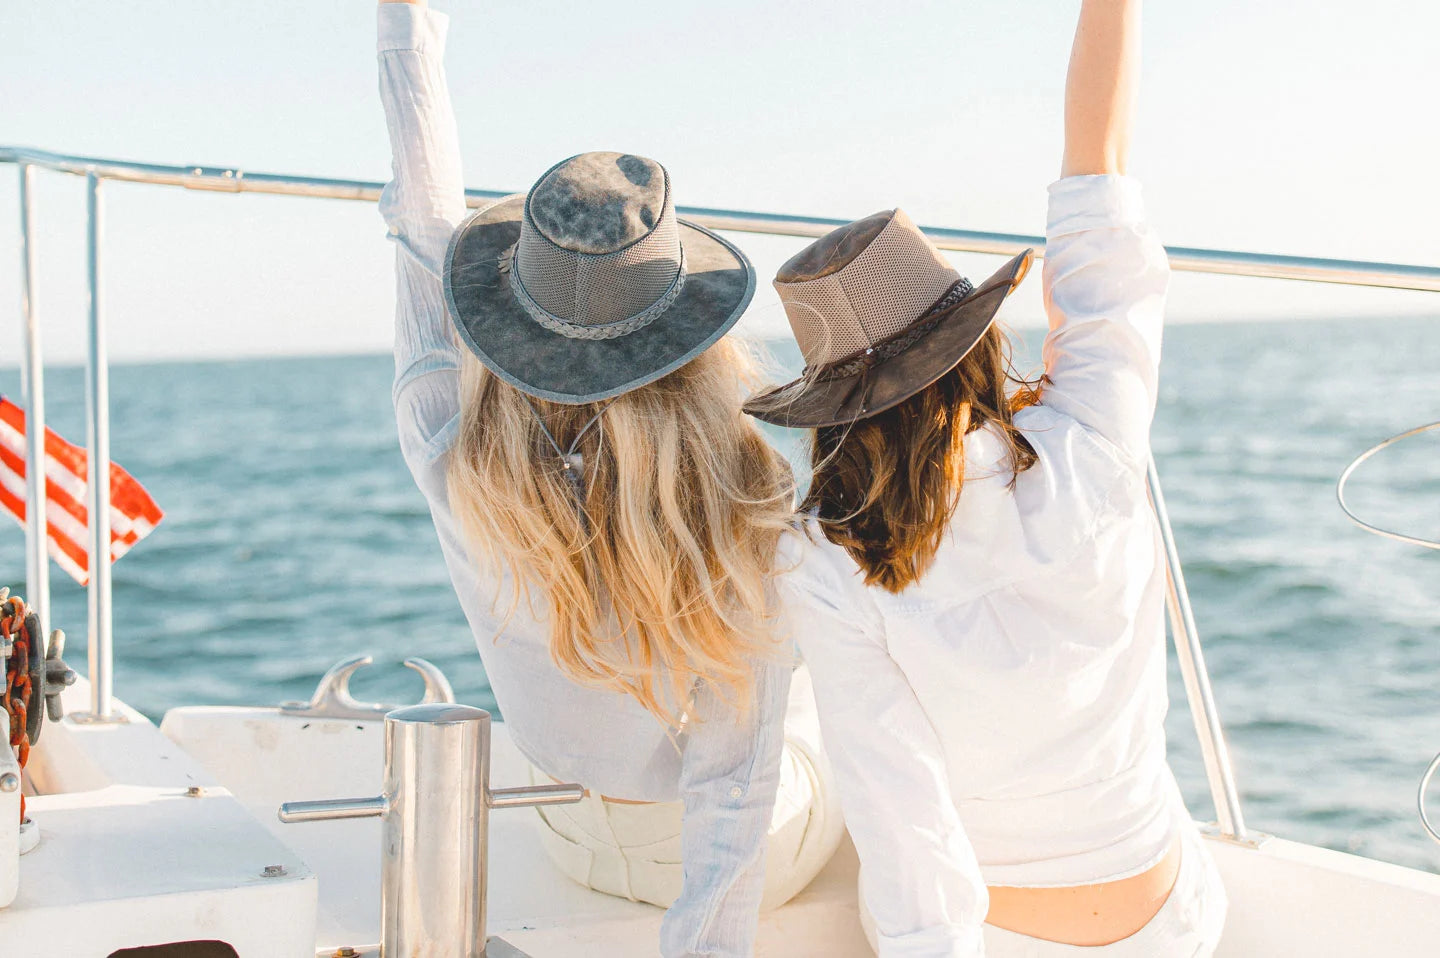 Women sitting on boat wearing the Breeze hat by American Hat Makers in grey and brown